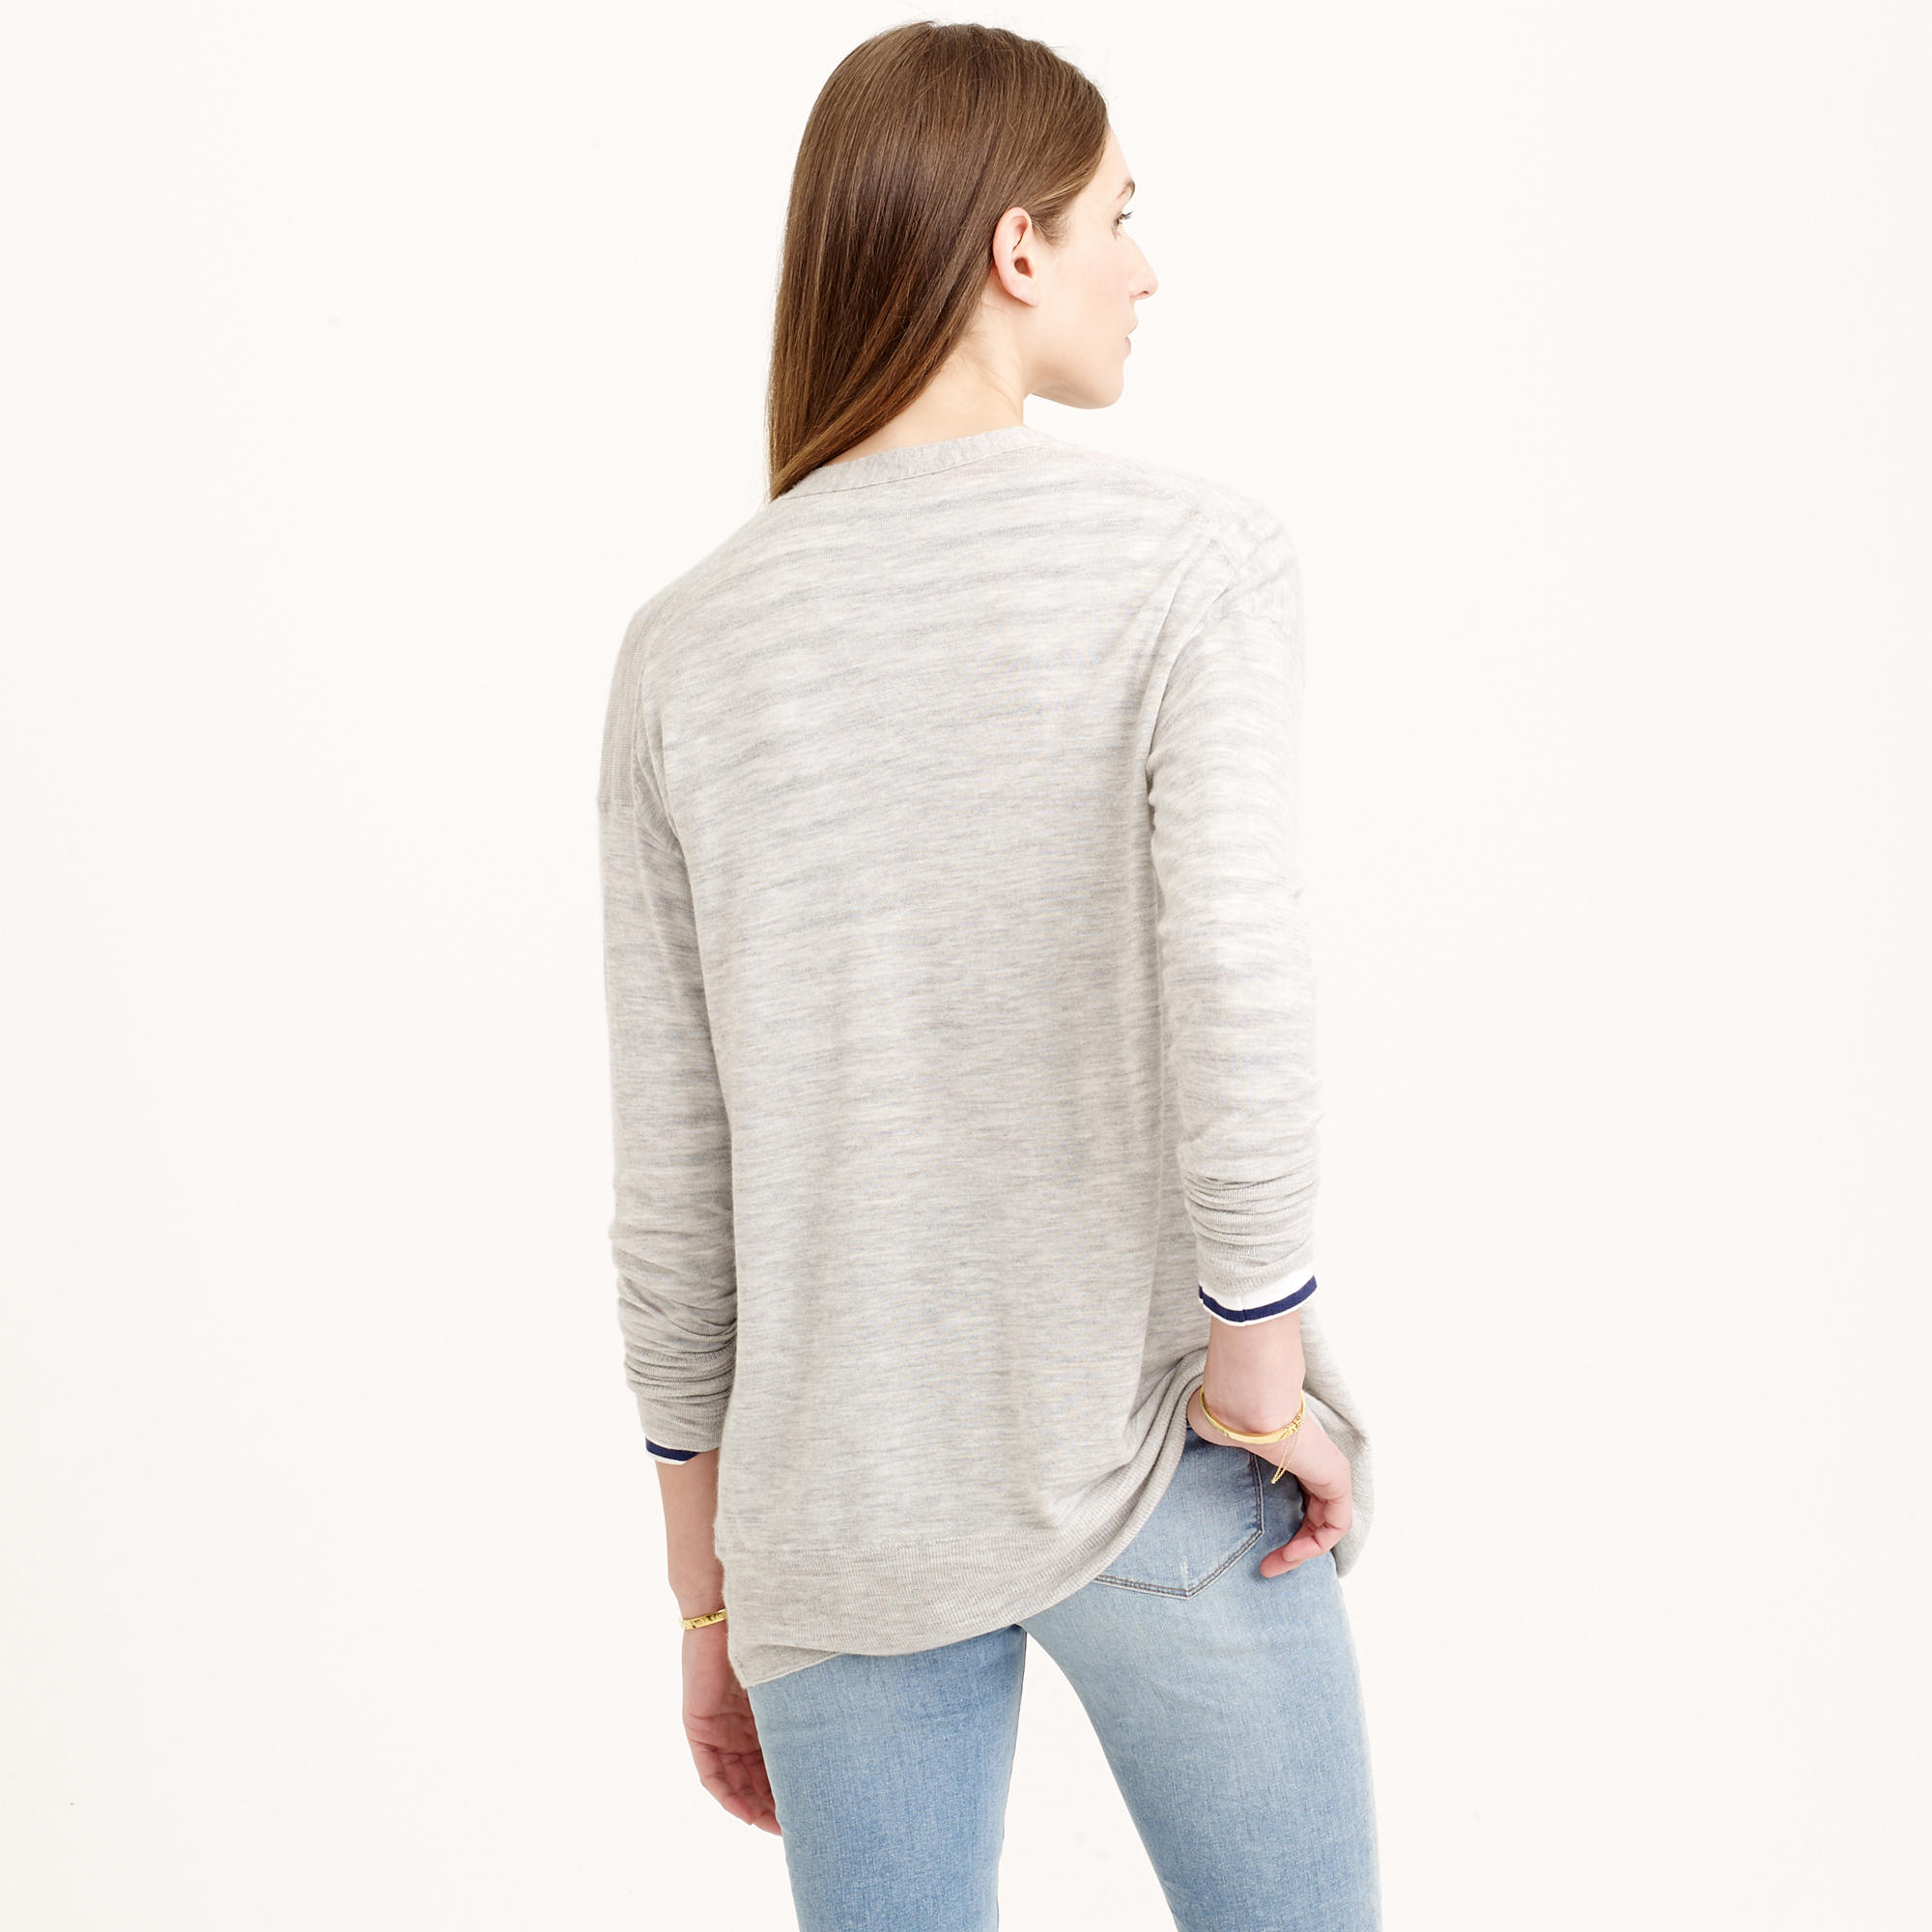 J.crew Collection Featherweight Cashmere Pocket Cardigan Sweater in